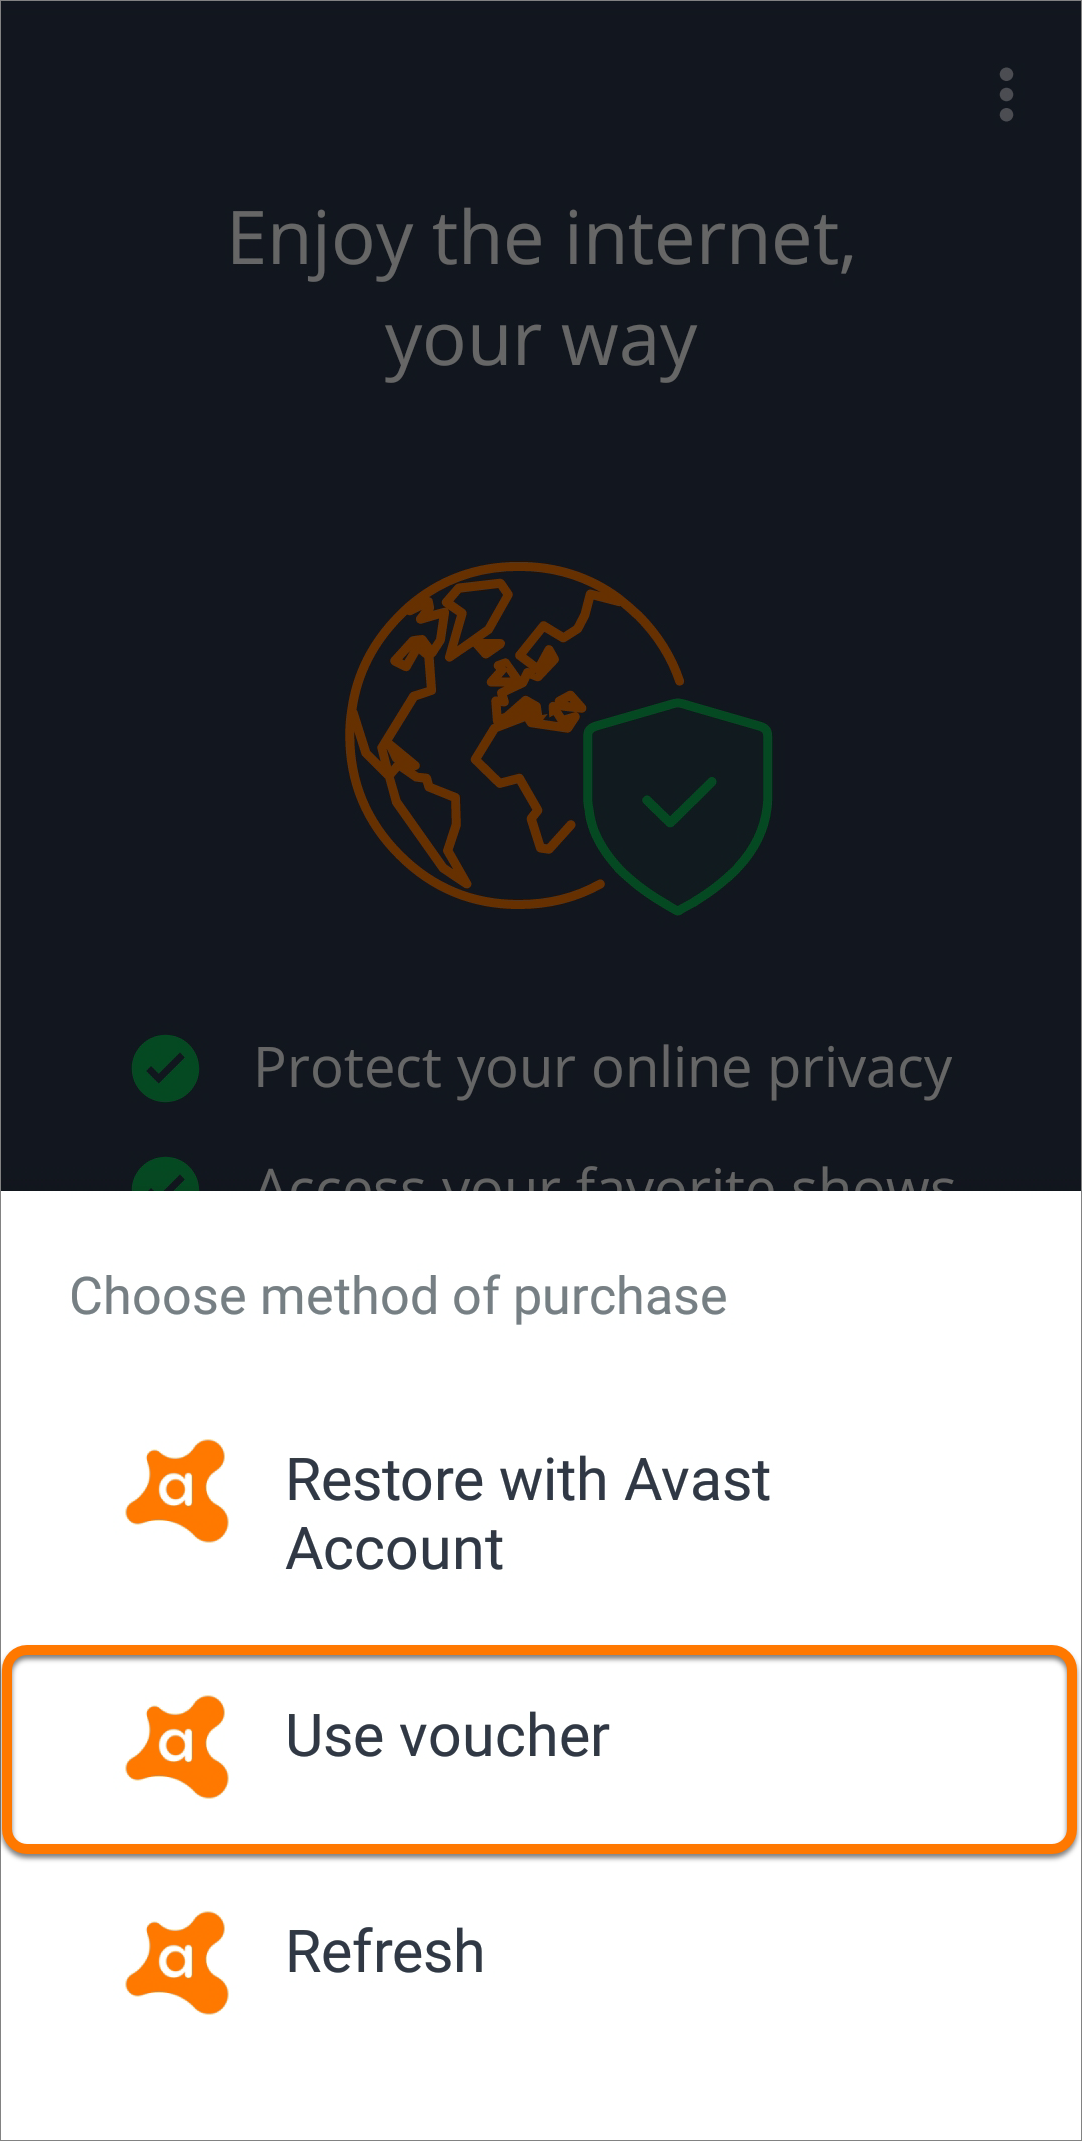 avast voucher code for android free 2015